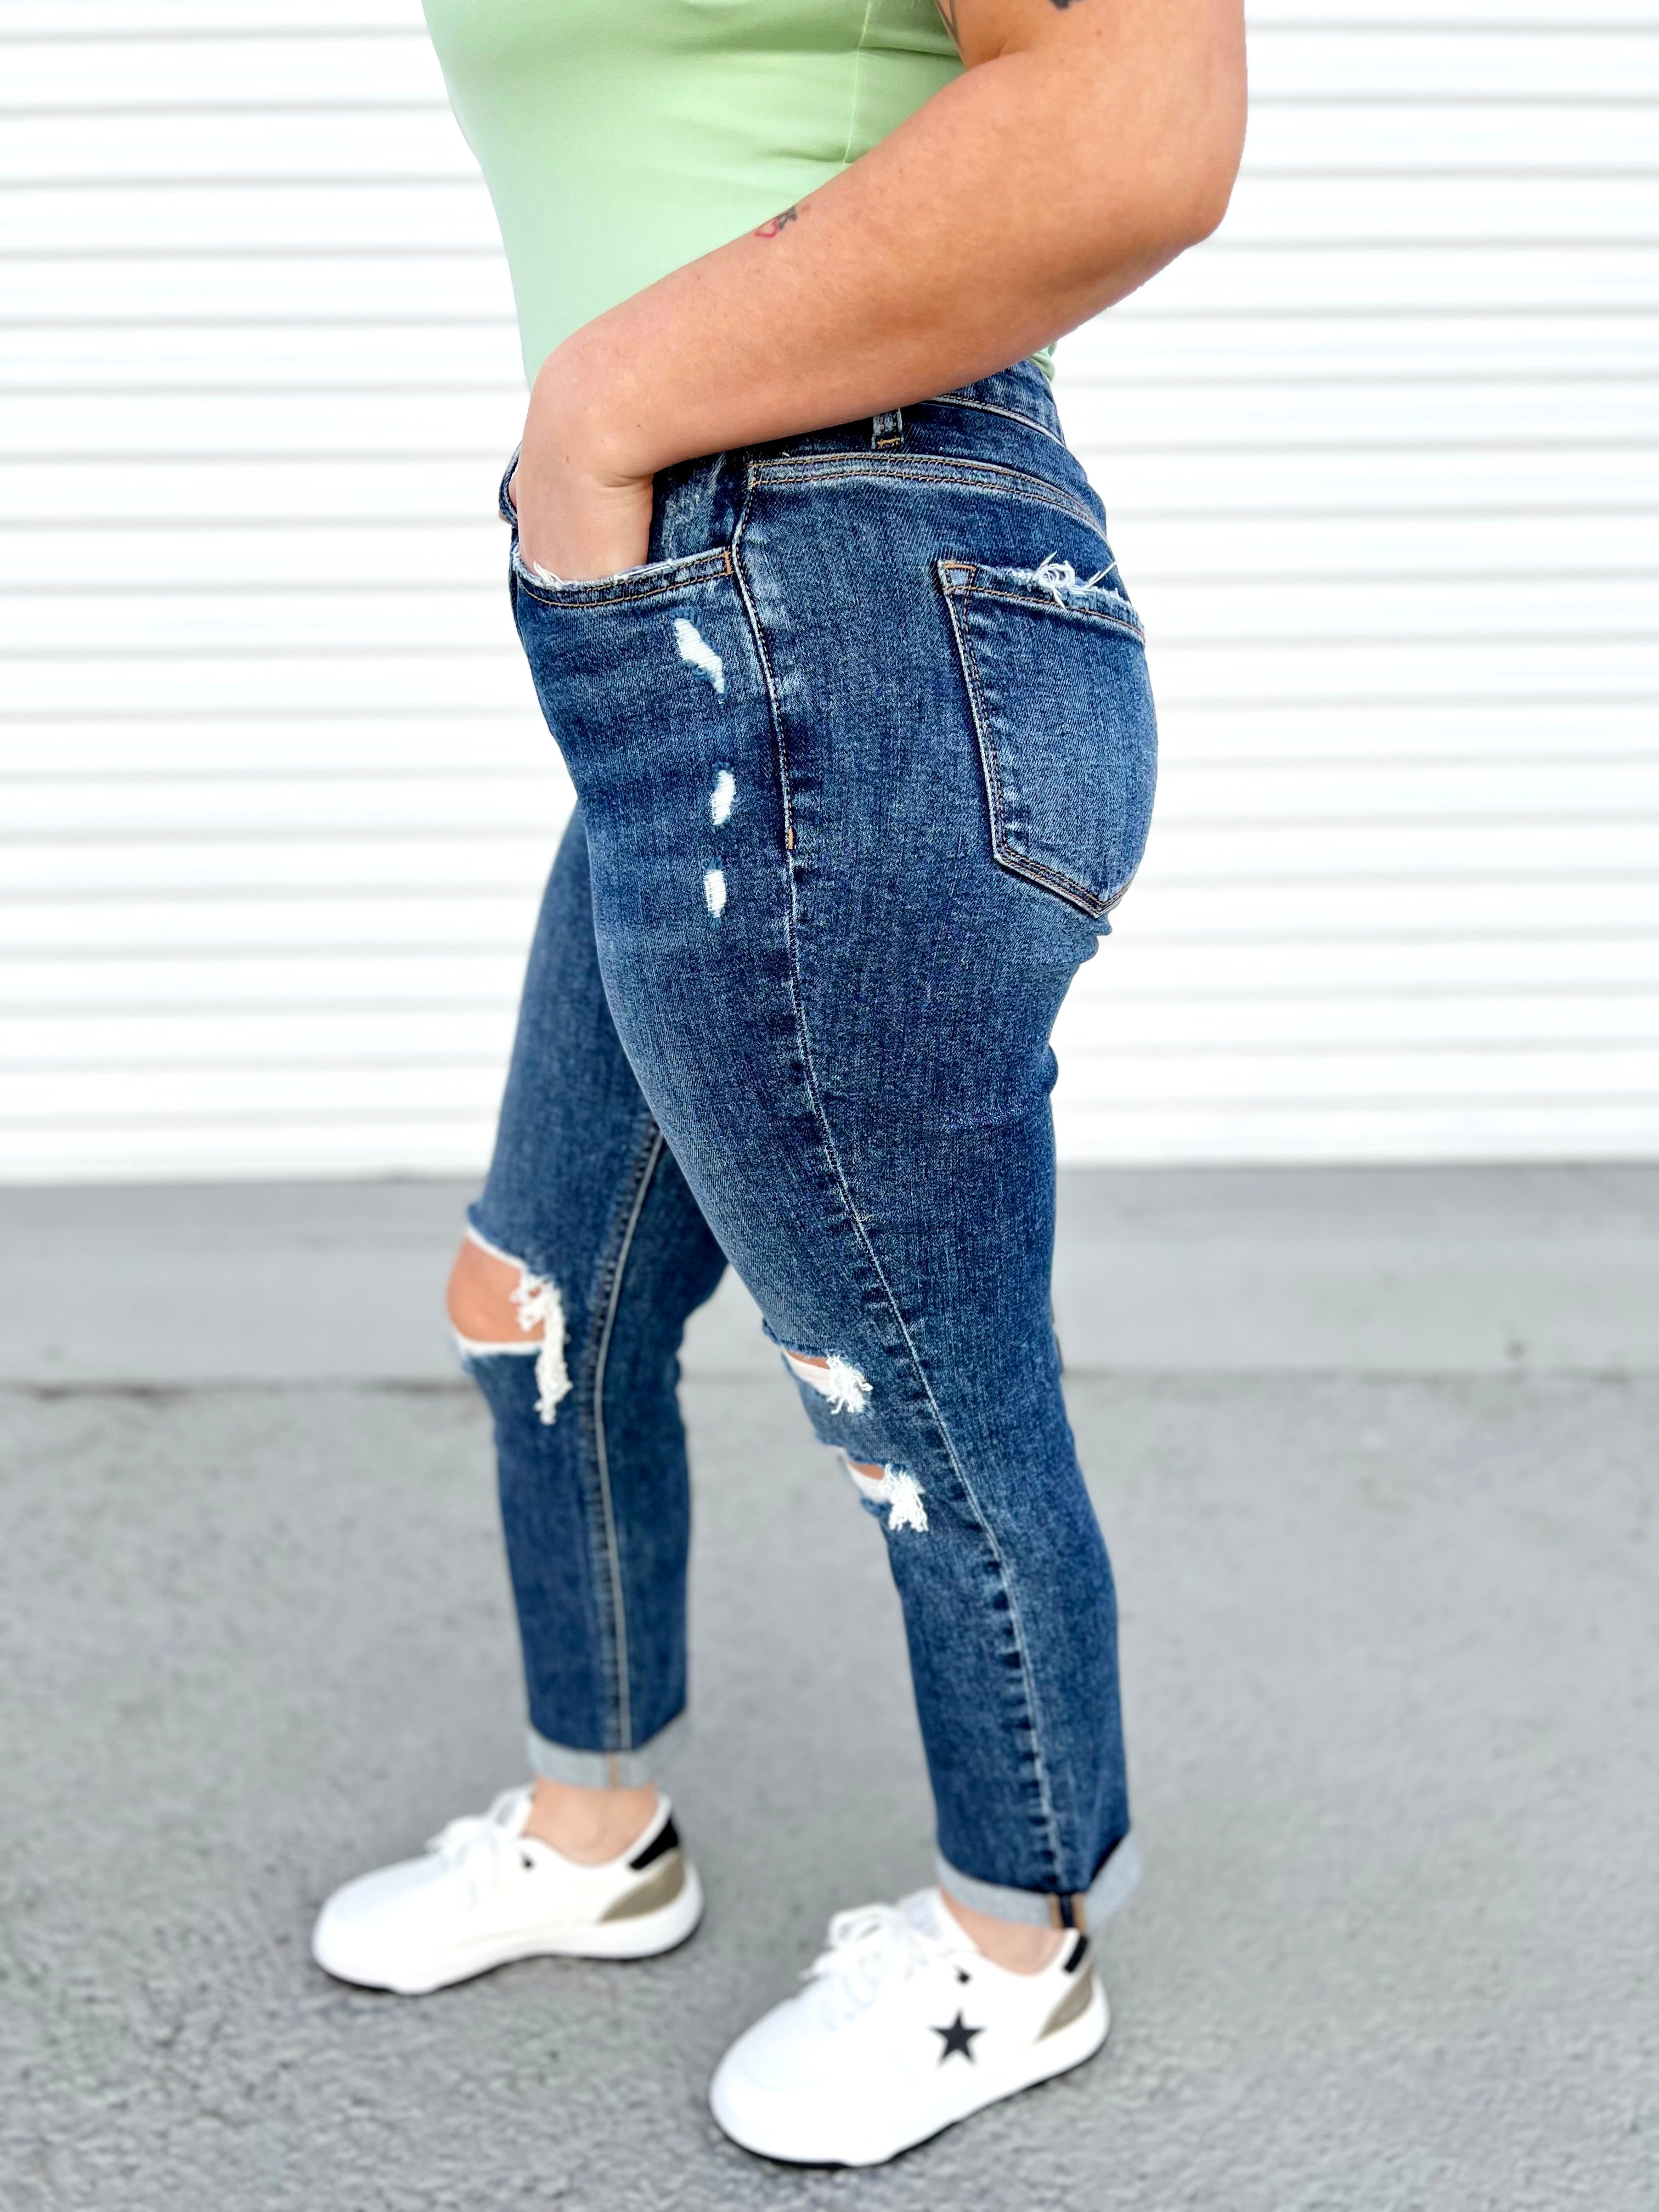 Lucky Chance Boyfriend Jeans by Lovervet-190 Jeans-Vervet-Heathered Boho Boutique, Women's Fashion and Accessories in Palmetto, FL